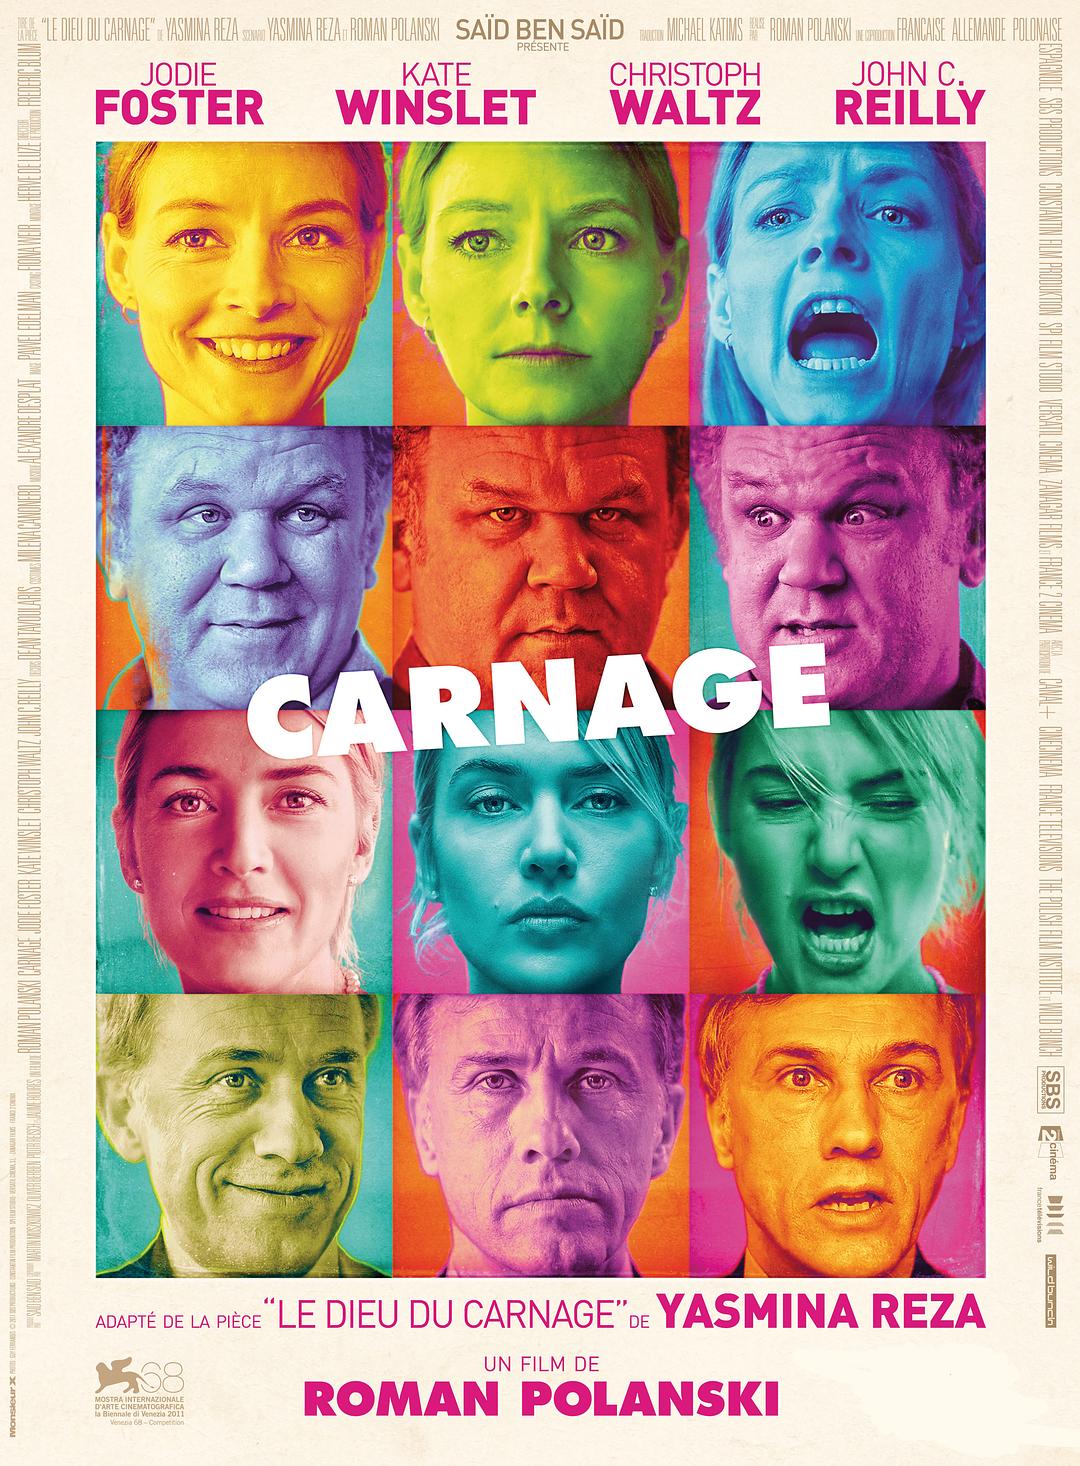 ɱ¾/˭ Carnage.2011.LIMITED.1080p.BluRay.x264-SPARKS 5.47GB-1.png